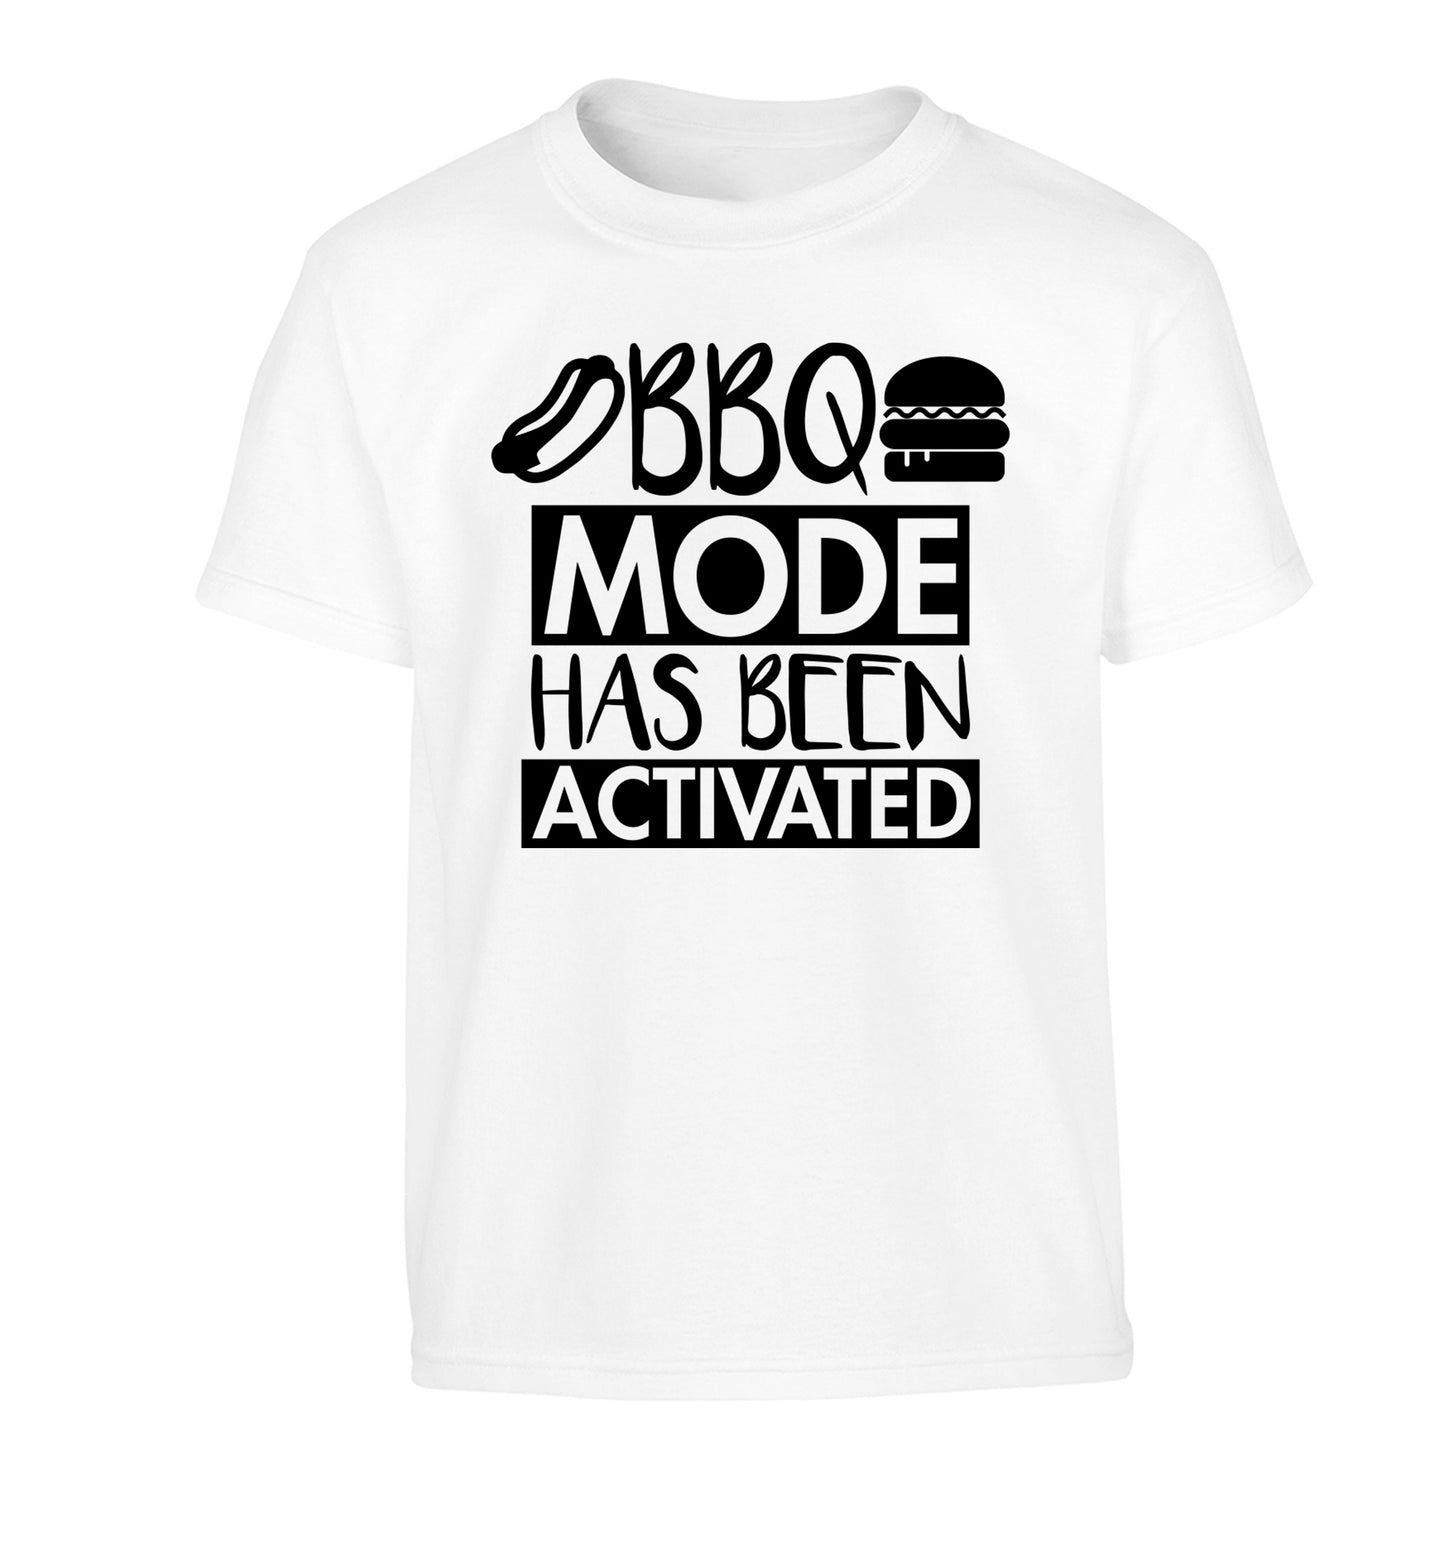 Bbq mode has been activated Children's white Tshirt 12-14 Years